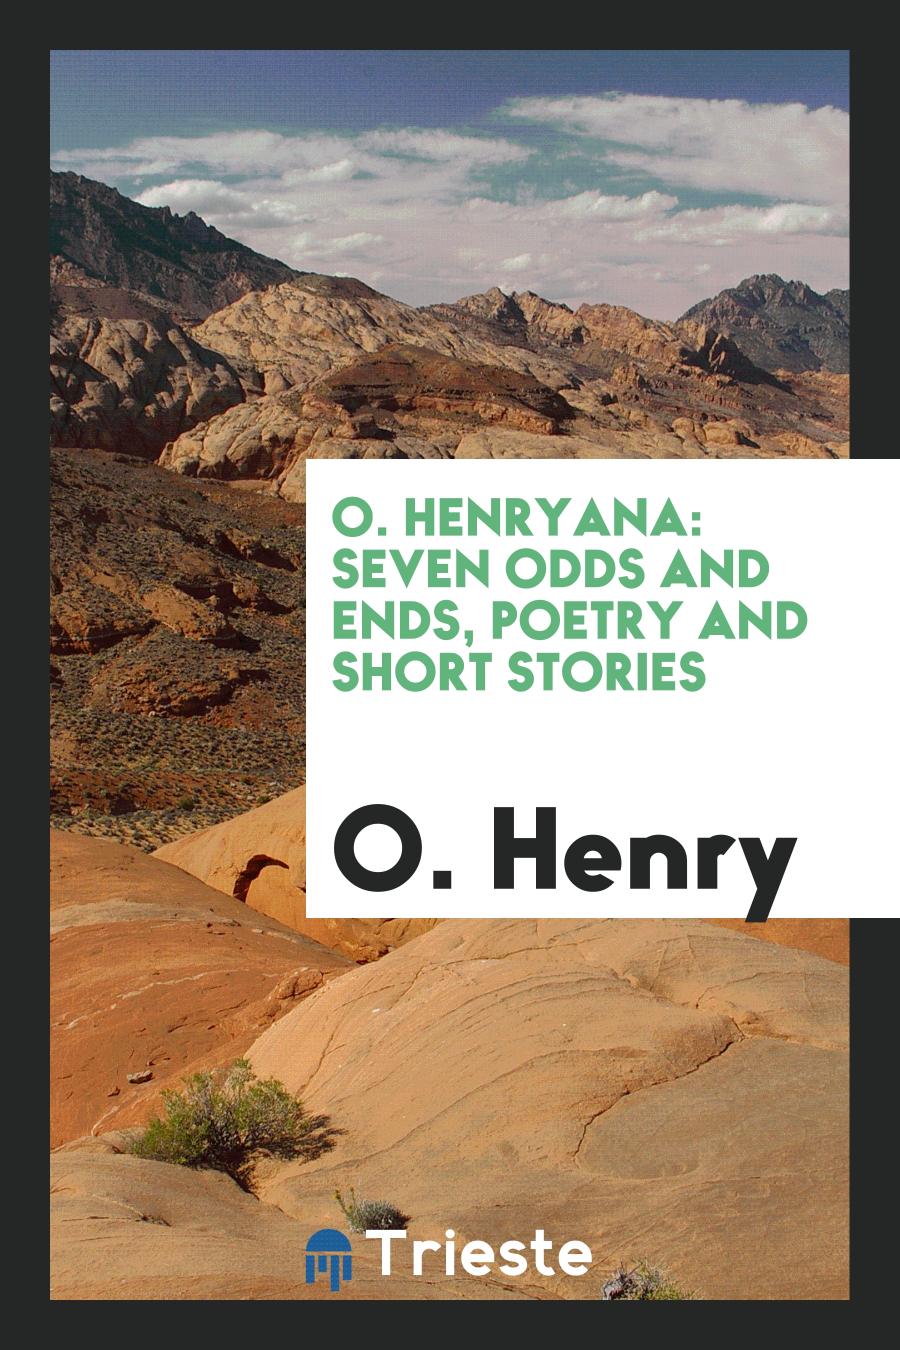 O. Henryana: Seven Odds and Ends, Poetry and Short Stories.